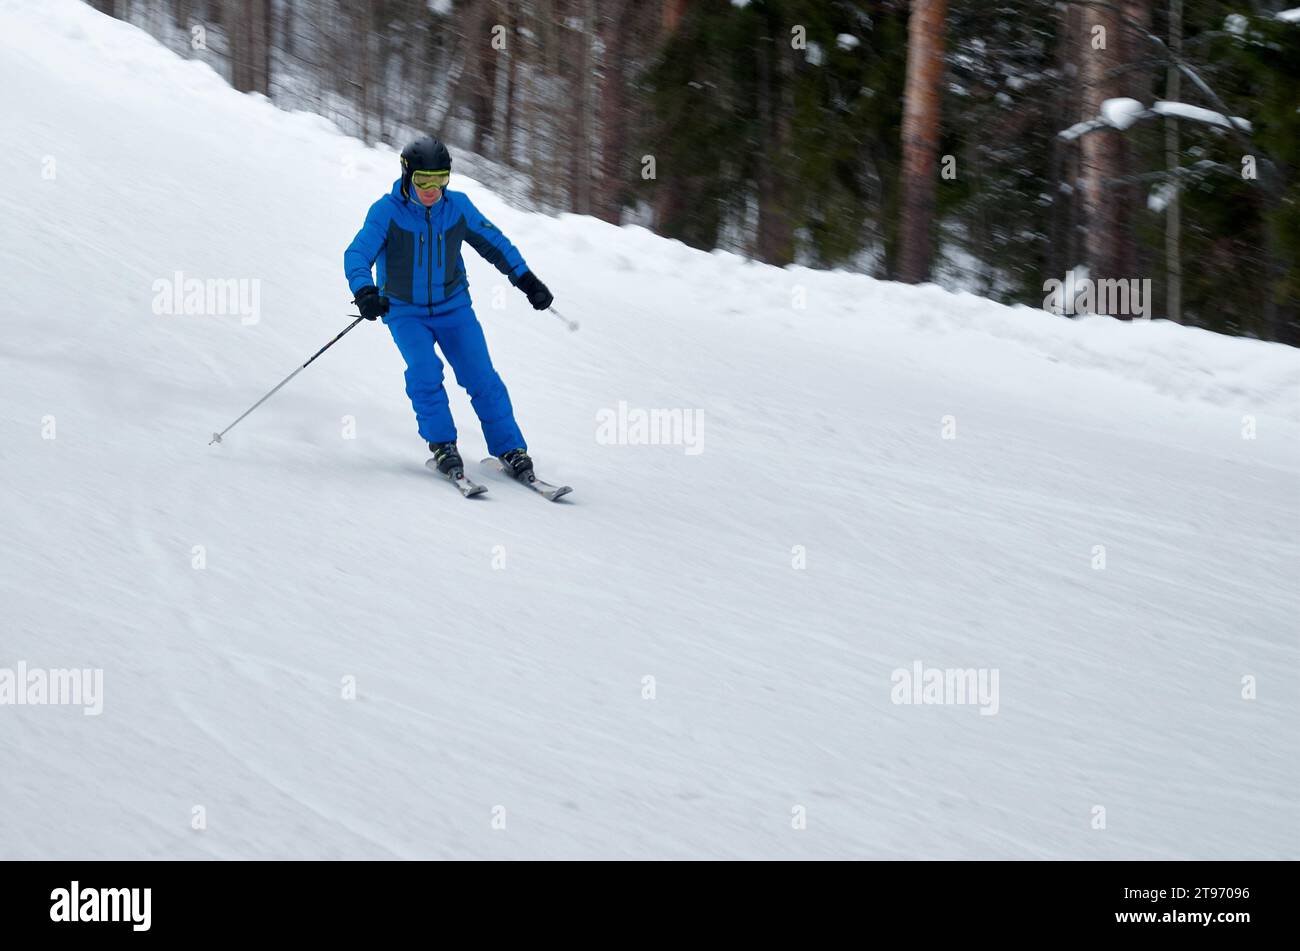 A man in blue sportswear on skis rides down a snowy slope Stock Photo